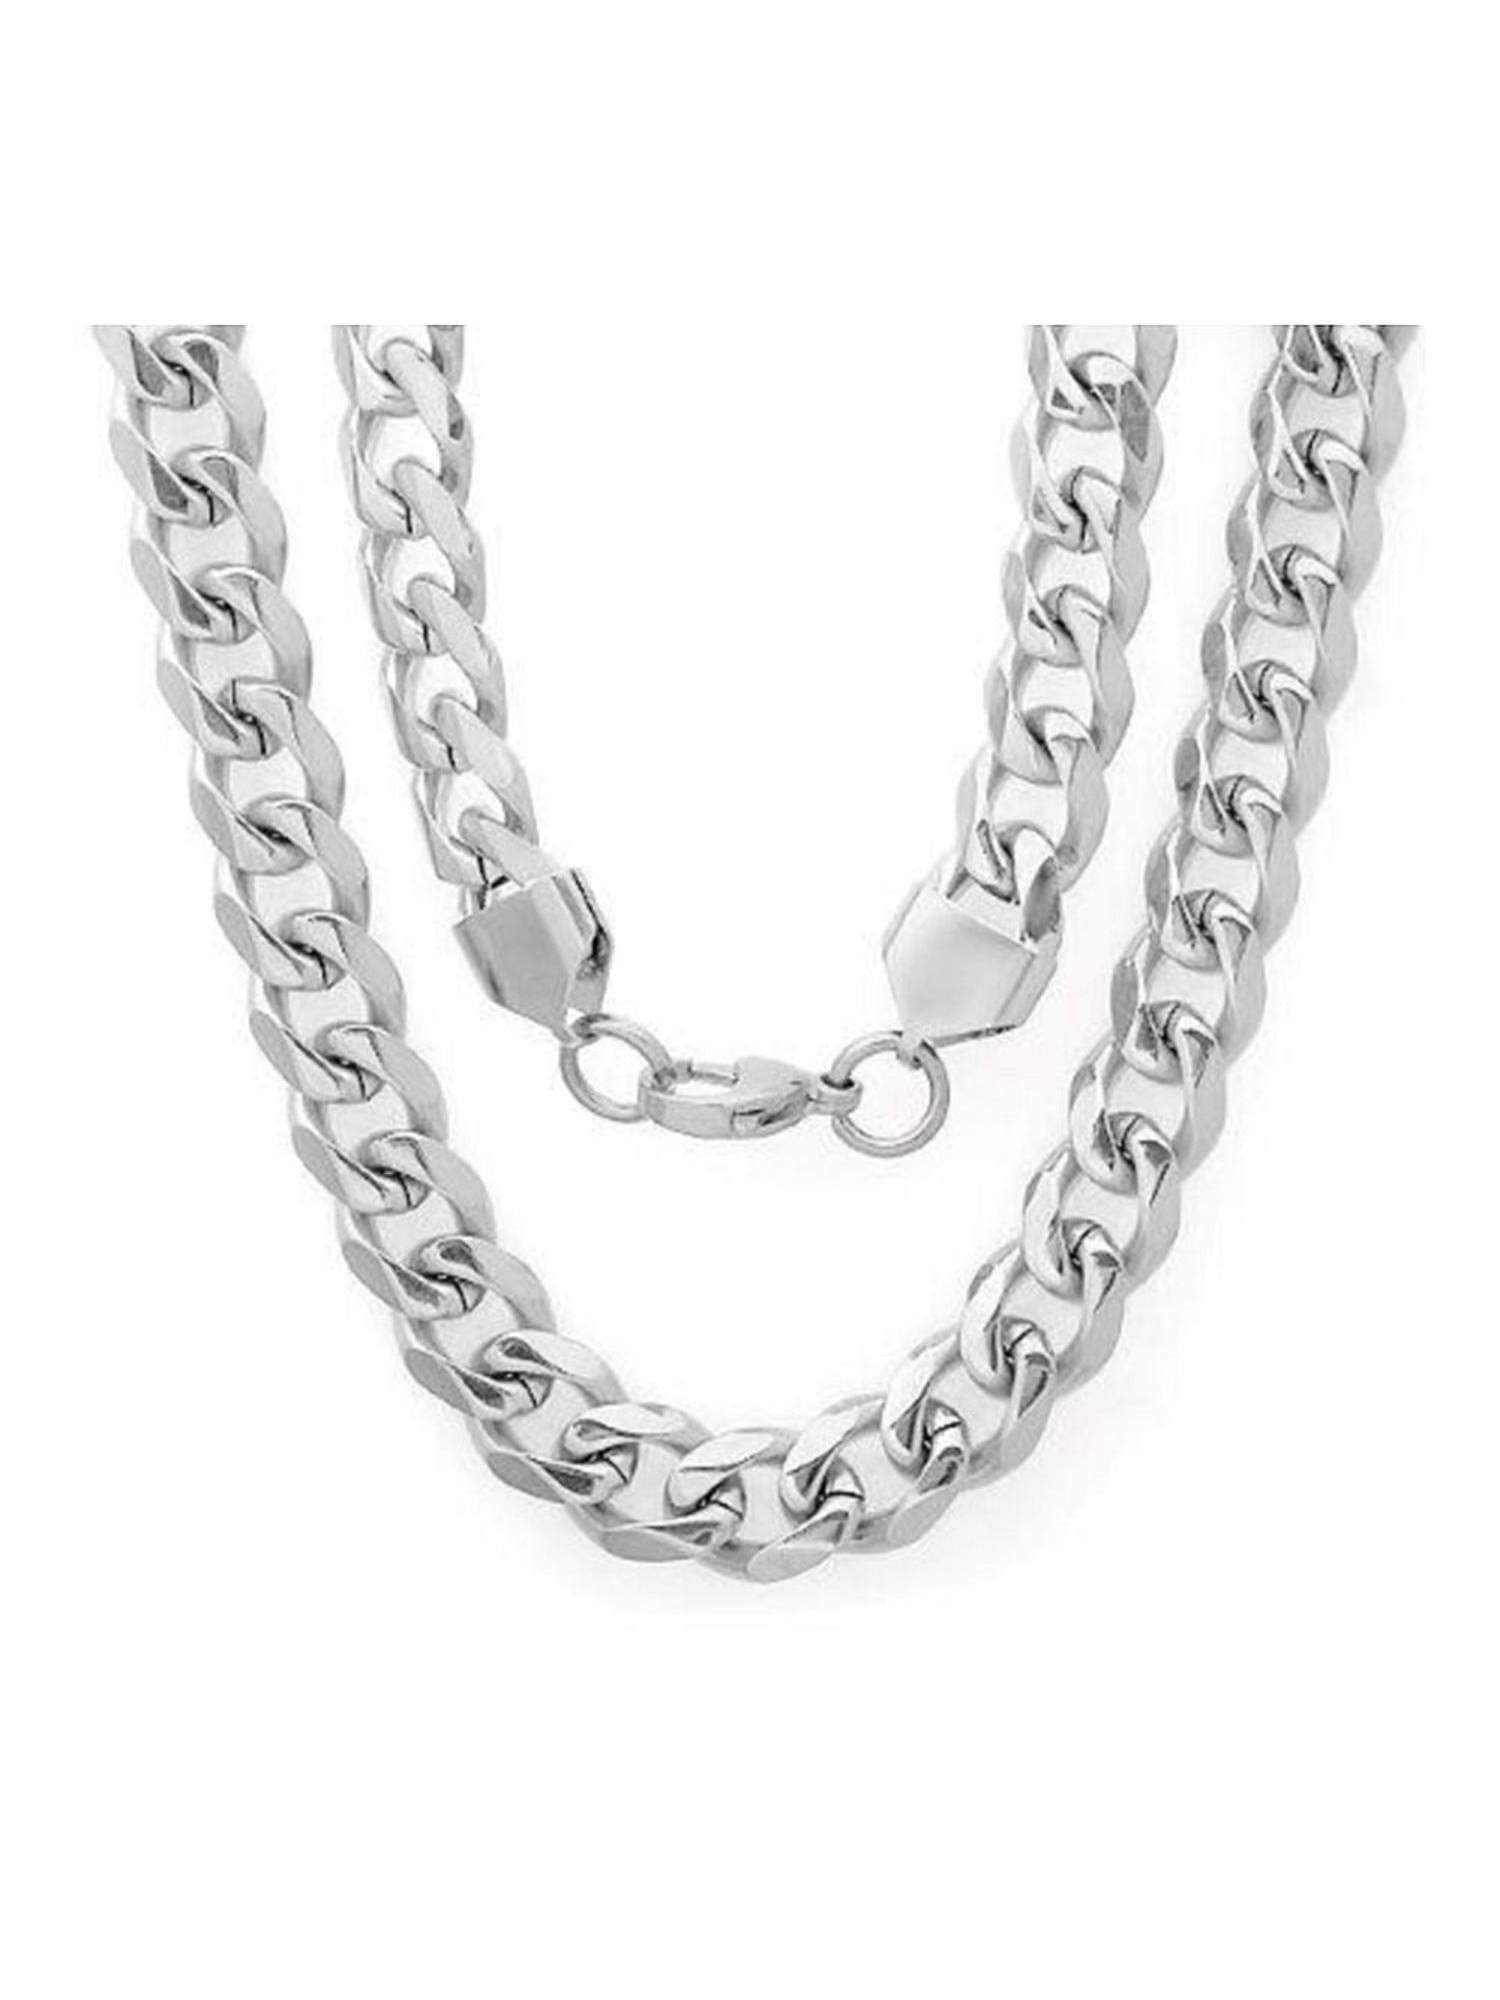 18" Chain Necklace Double Ring Stainless Steel Chain with Lobster Clasp 